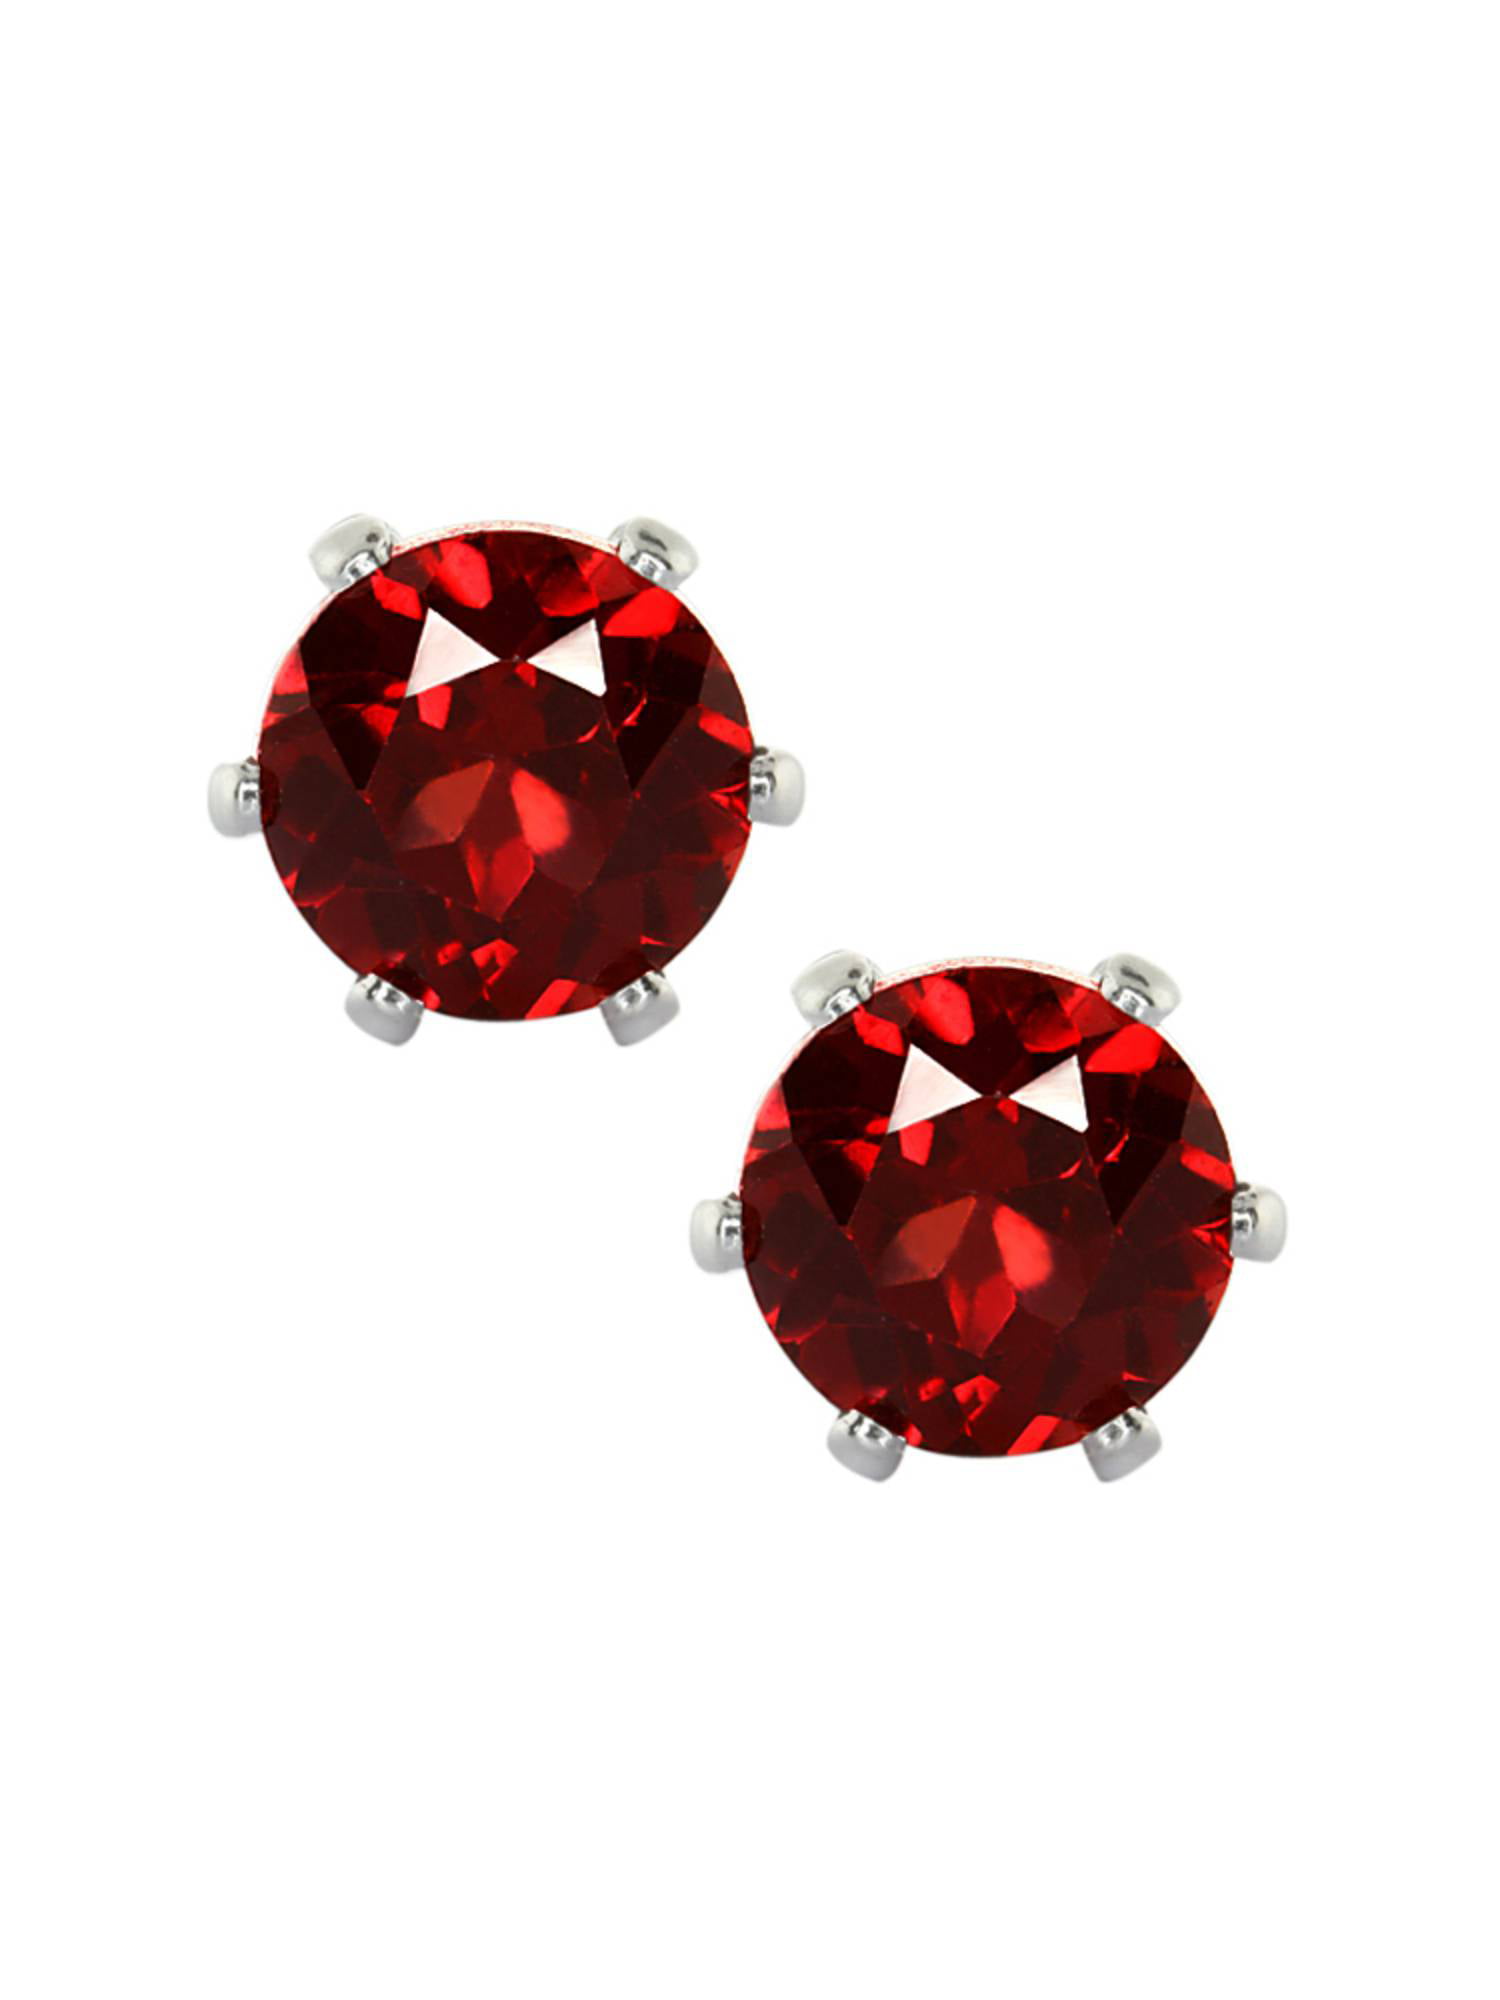 Gem Stone King 2.10 Ct Round Red Ruby Silver Plated 6-prong Stud Earrings 6mm